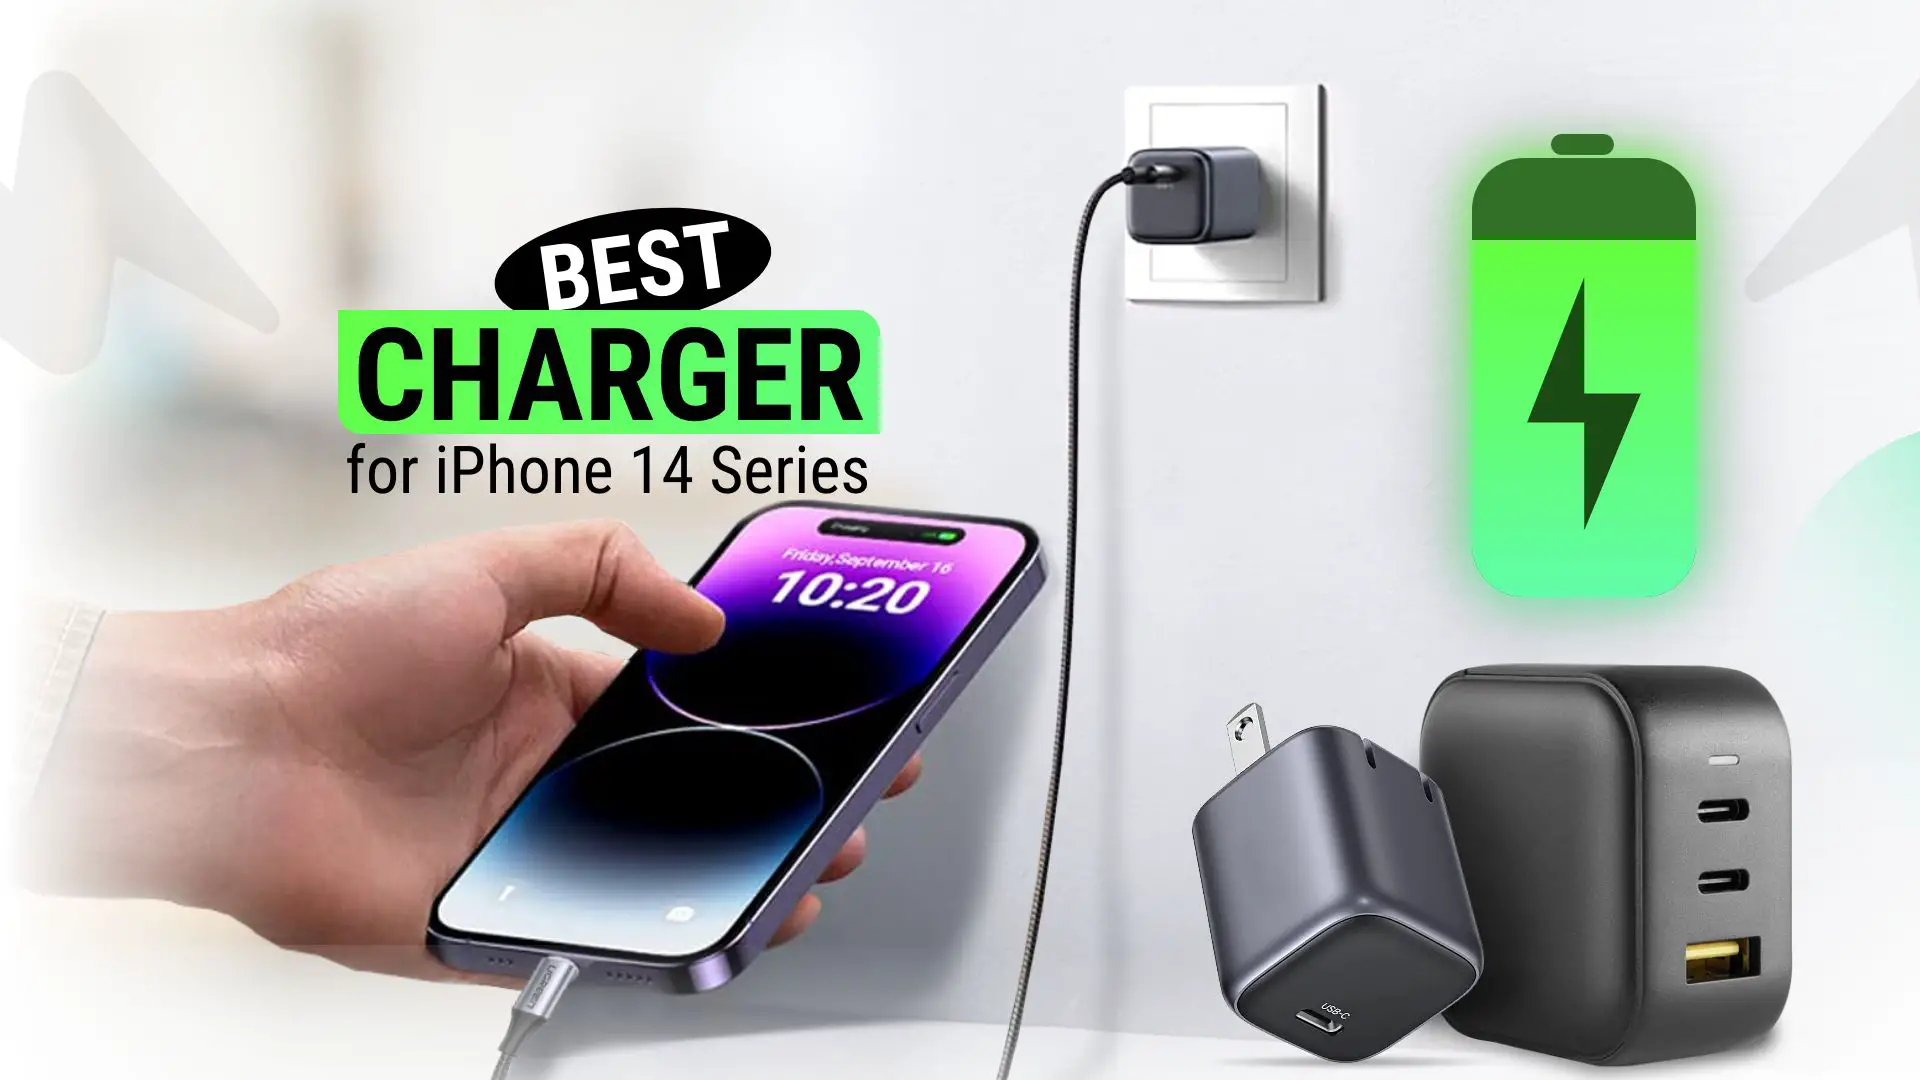 Best Charger for iPhone 14